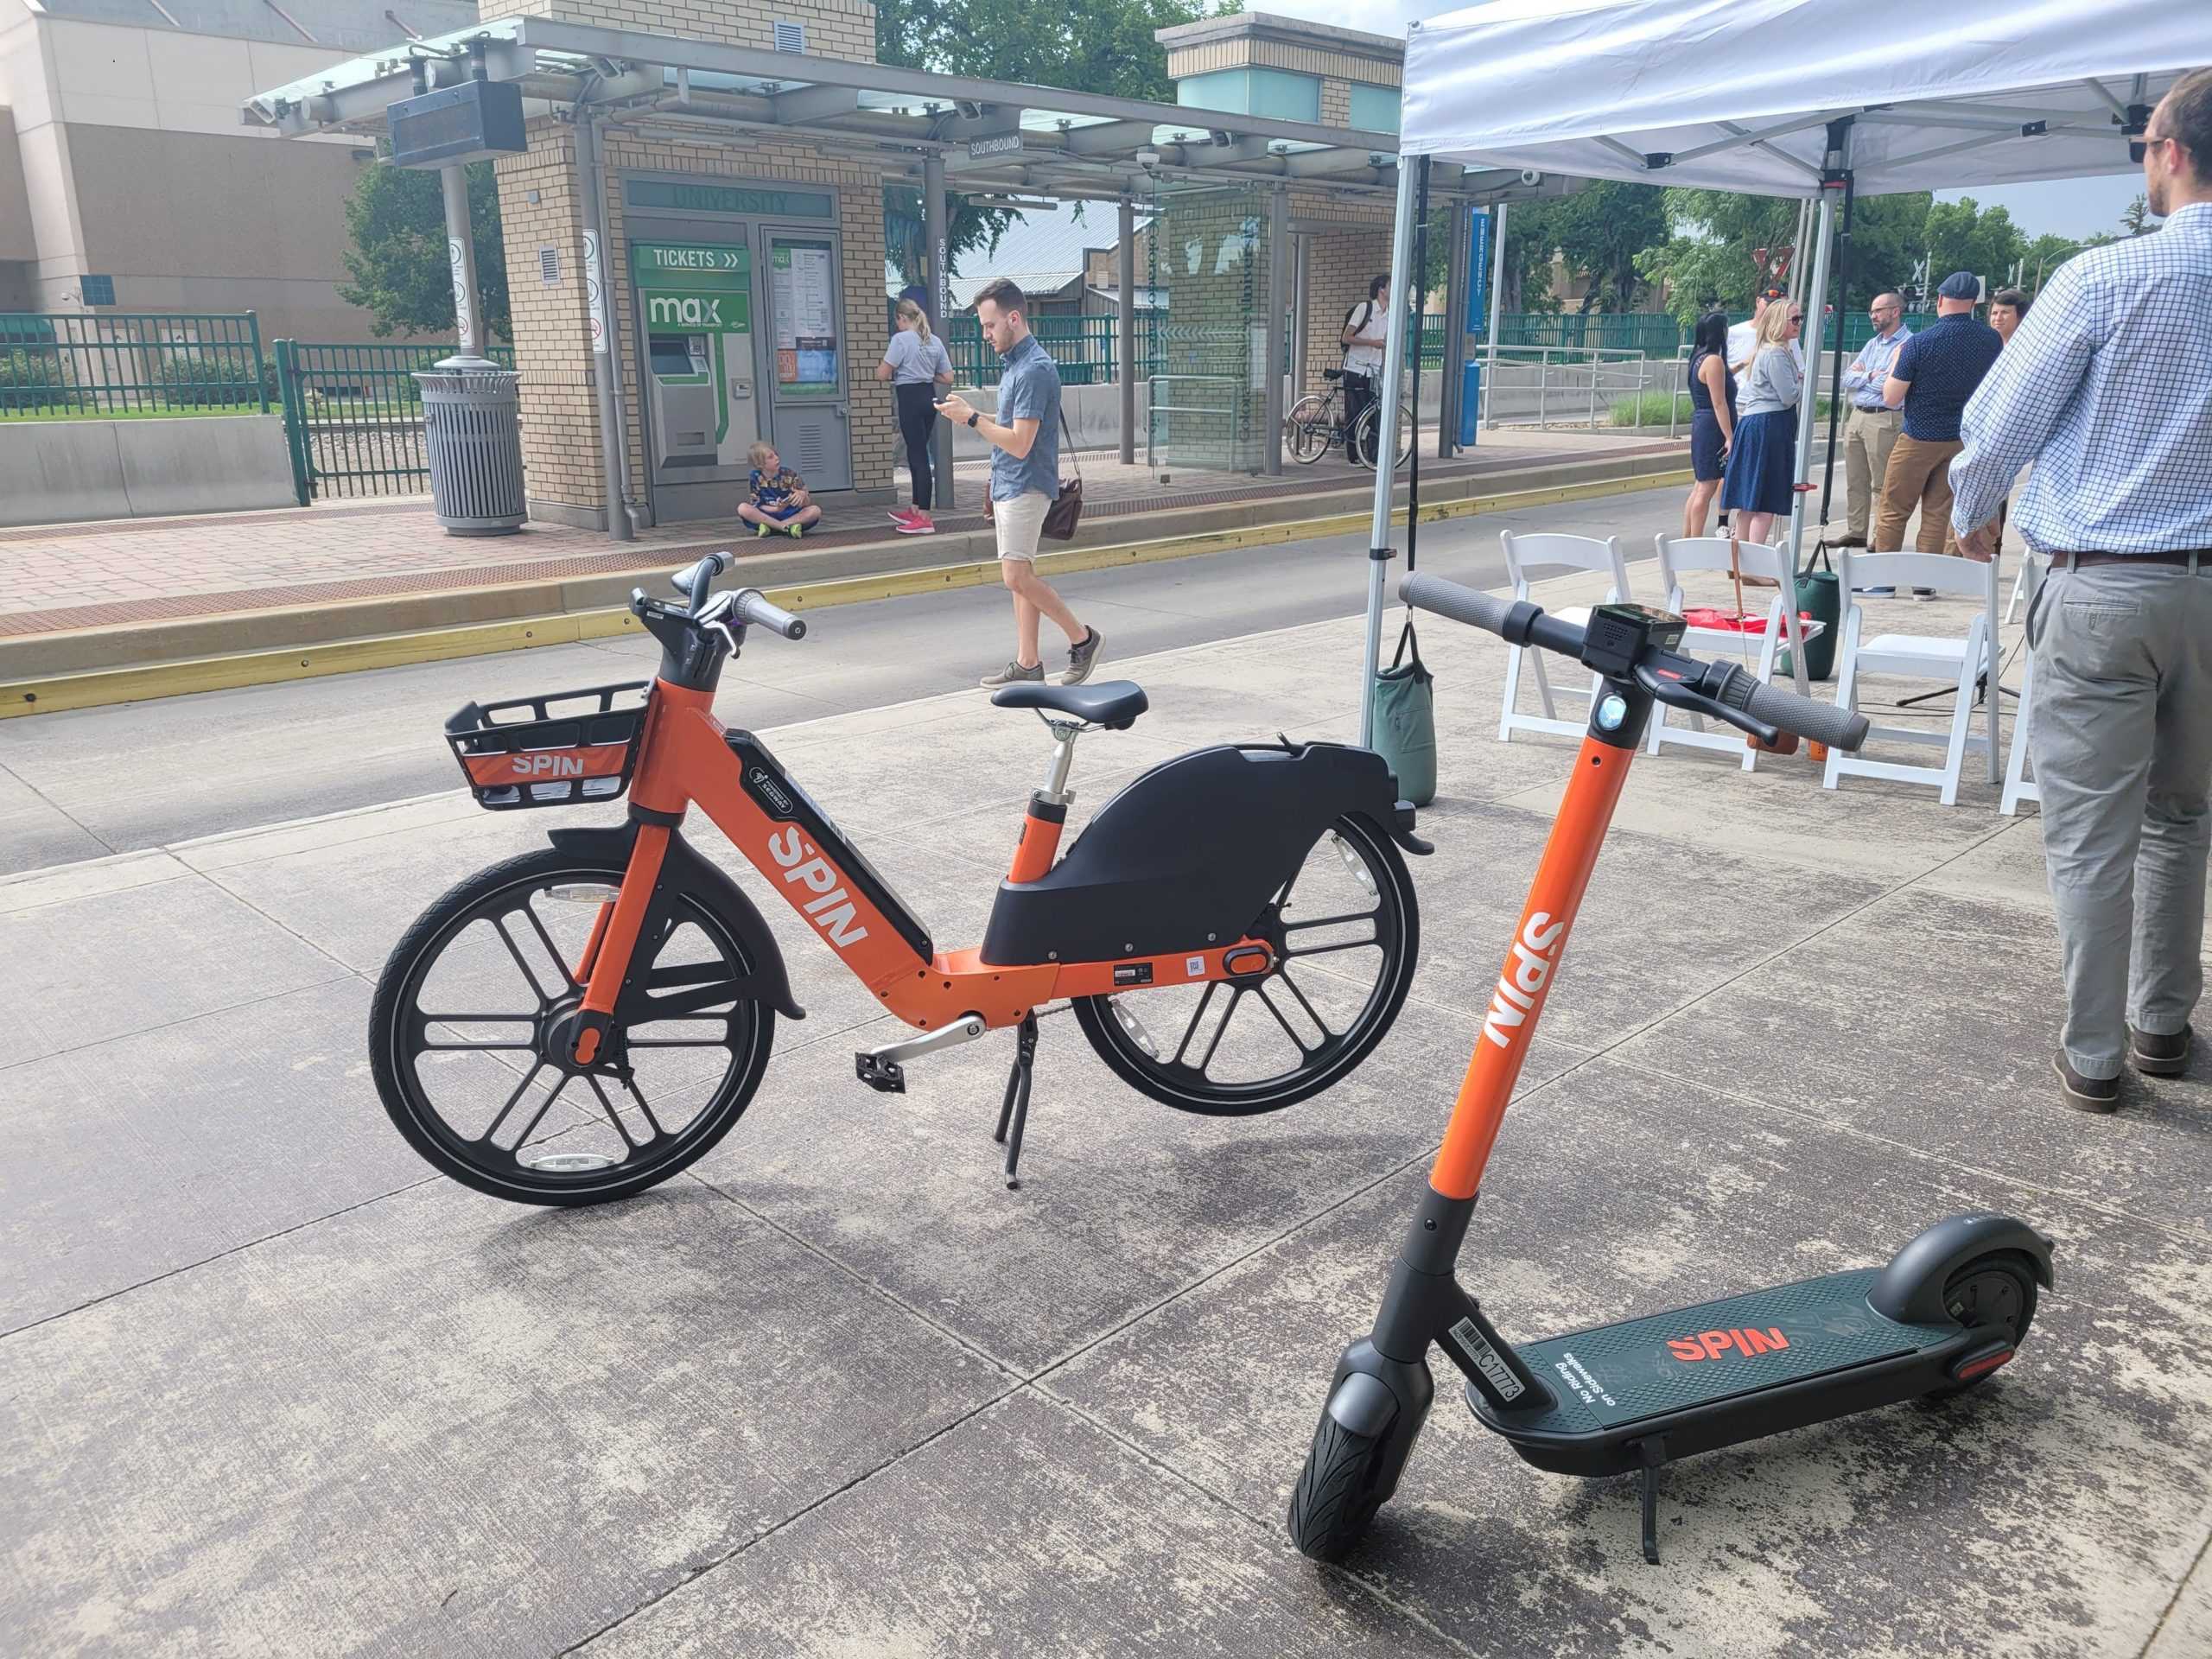 An organge electric bike and an orange electric scooter sit on a sidewalk for display.